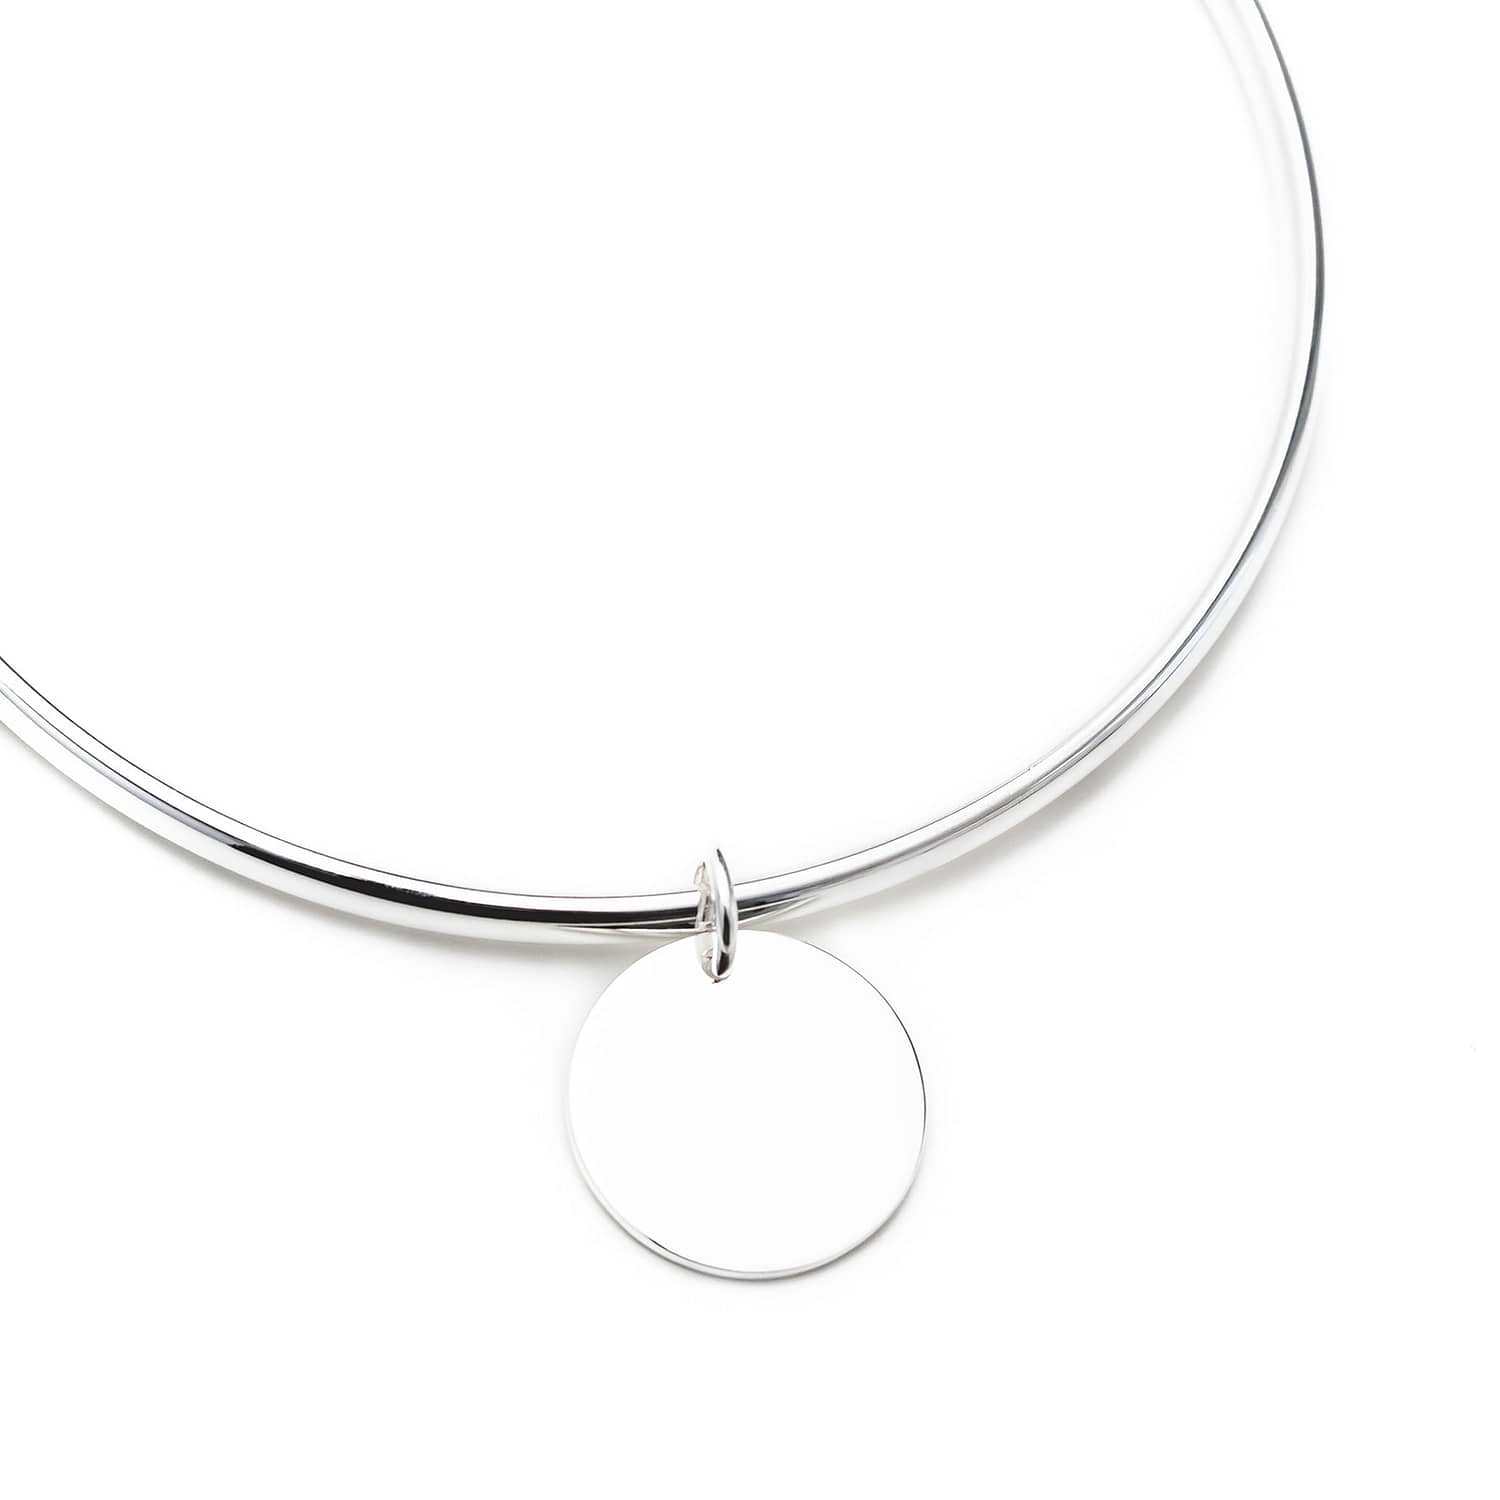 engrave the disc on this sterling silver bangle